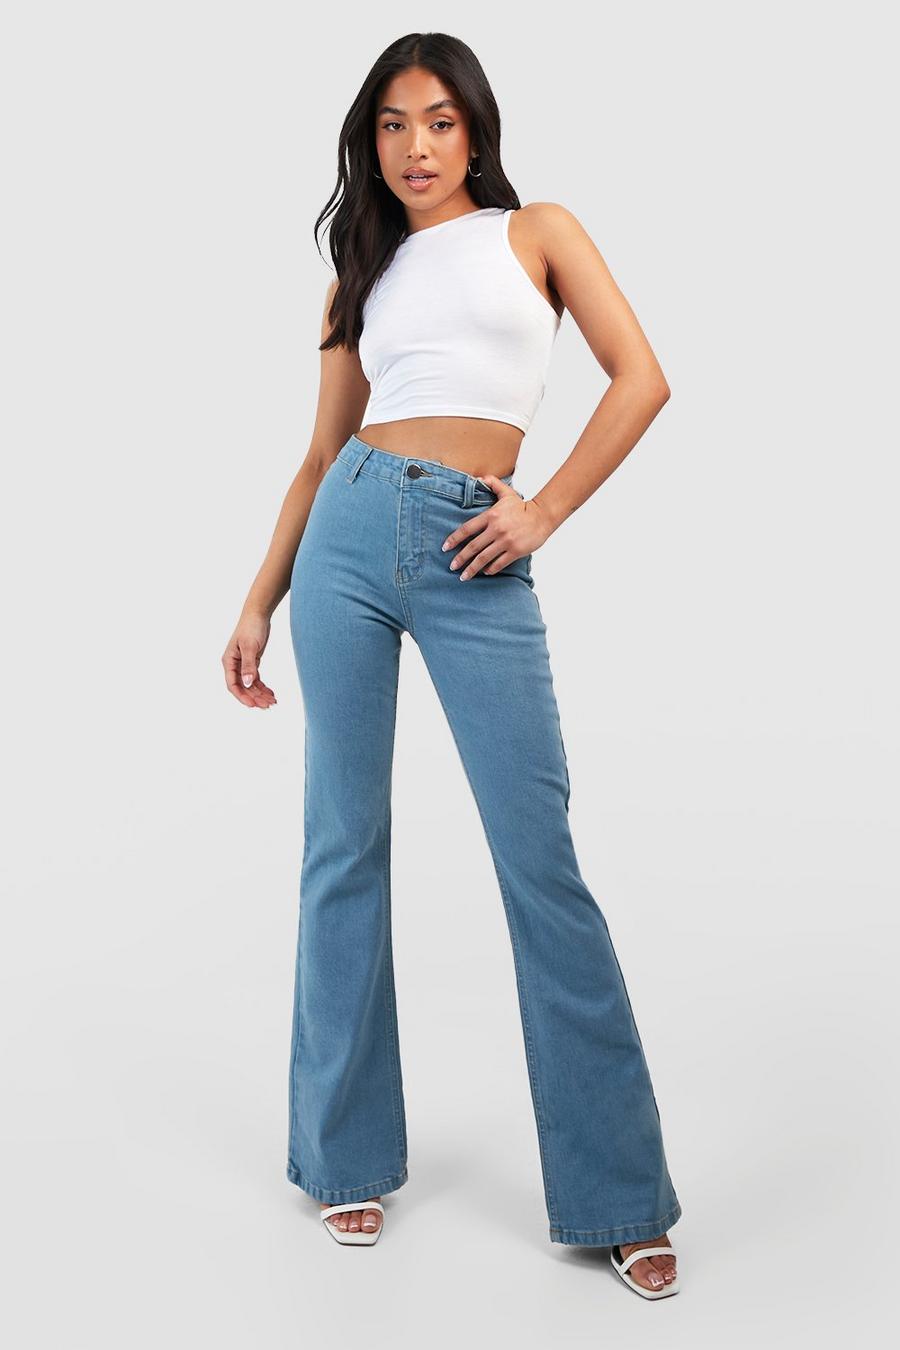 The 10 Best Flare Jeans For Petite Women  Petite flare jeans, Jeans for short  women, Flare jeans